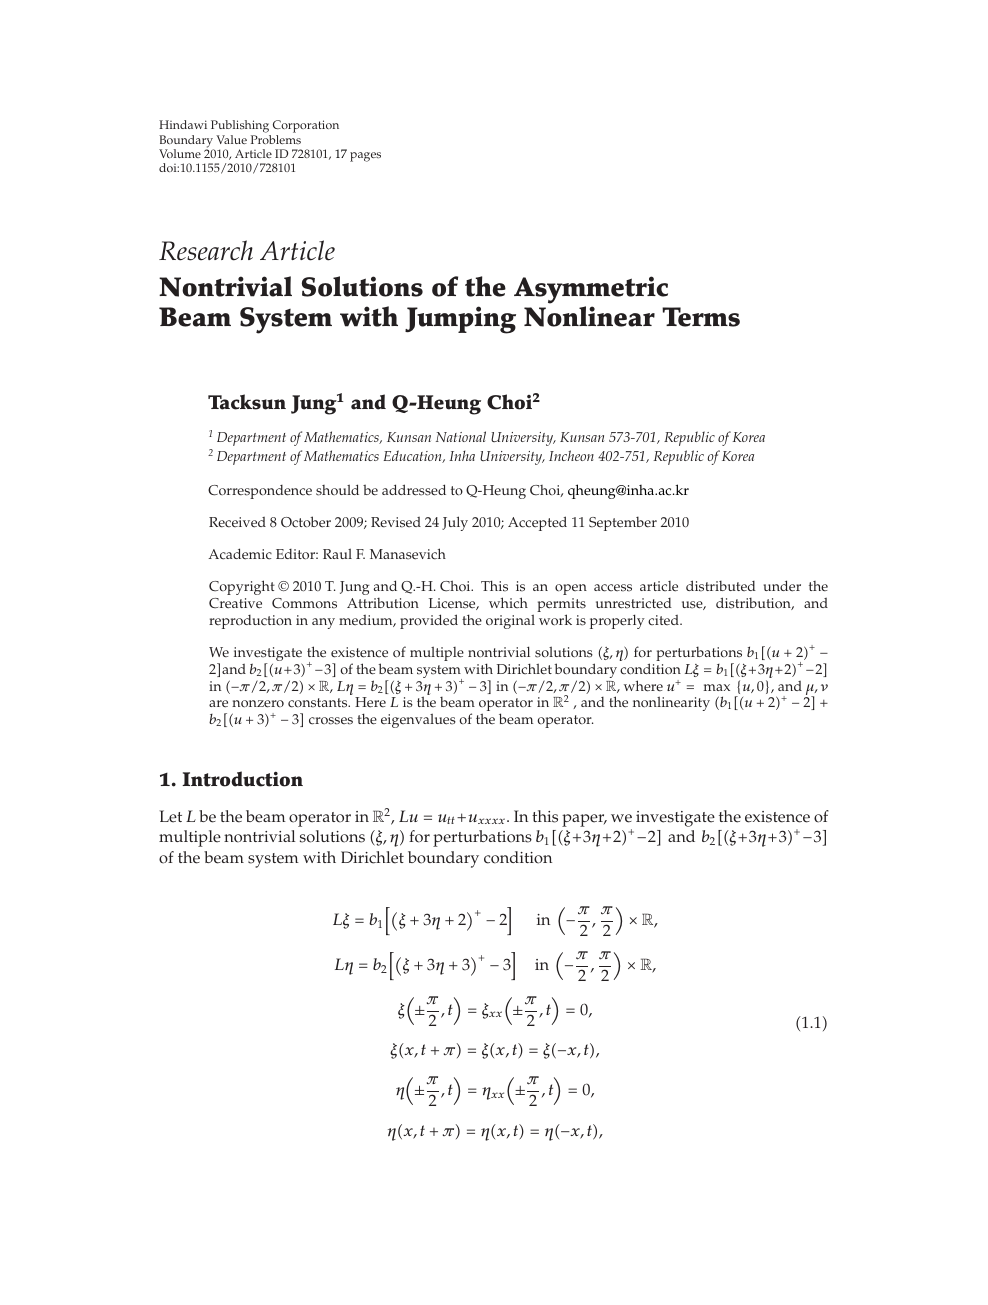 Nontrivial Solutions Of The Asymmetric Beam System With Jumping Nonlinear Terms Topic Of Research Paper In Mathematics Download Scholarly Article Pdf And Read For Free On Cyberleninka Open Science Hub